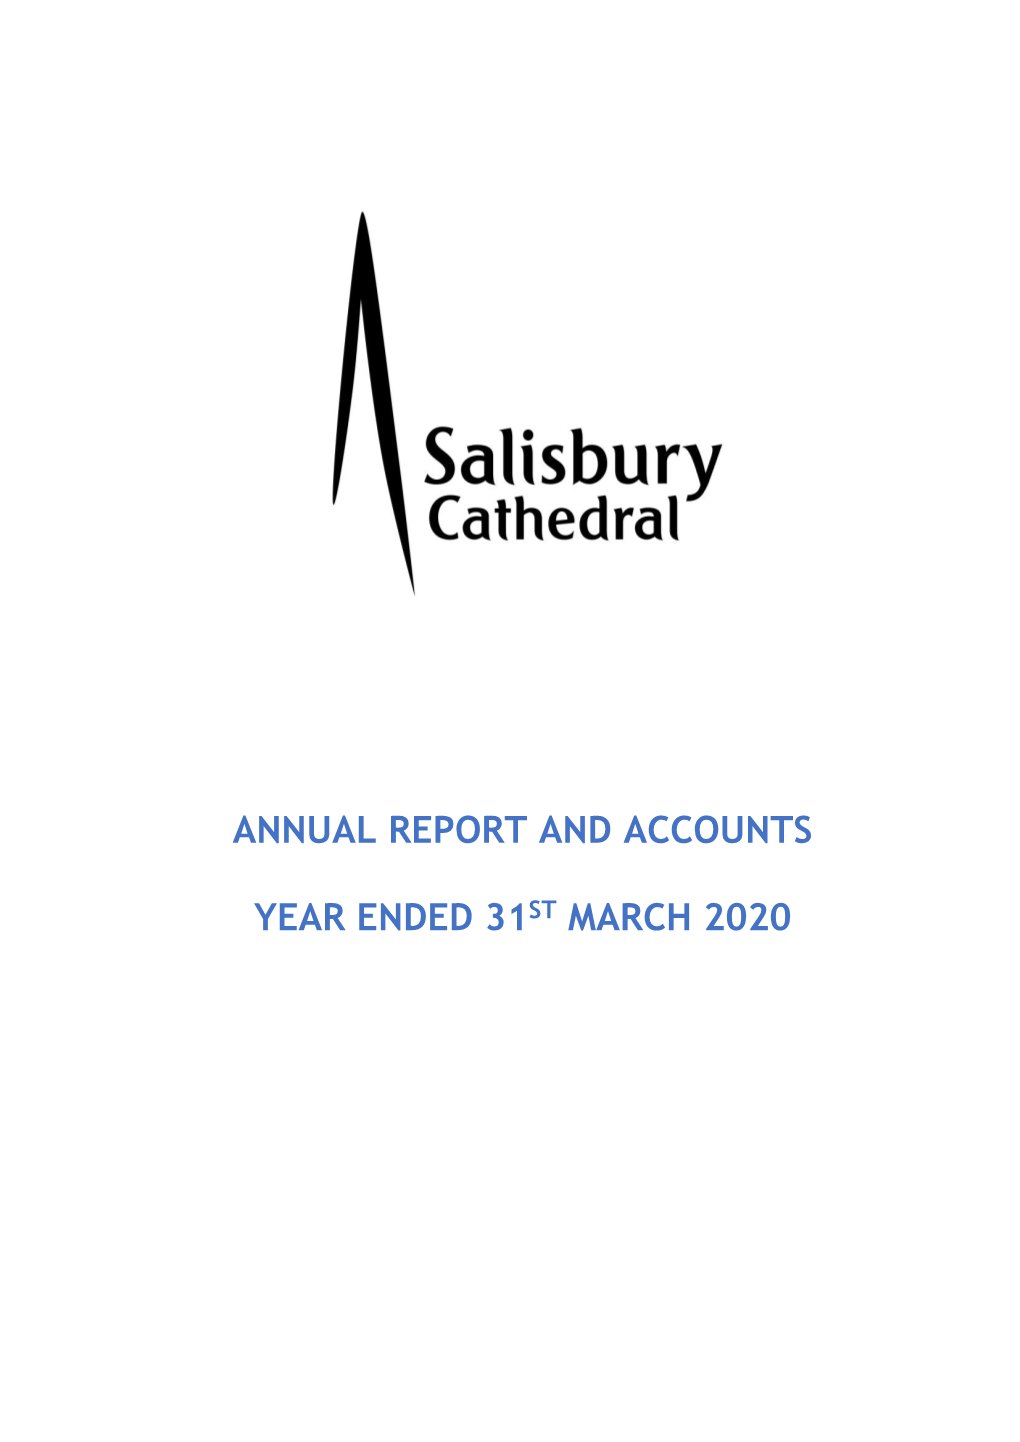 Salisbury Cathedral Annual Report and Accounts 2019-20.Pdf